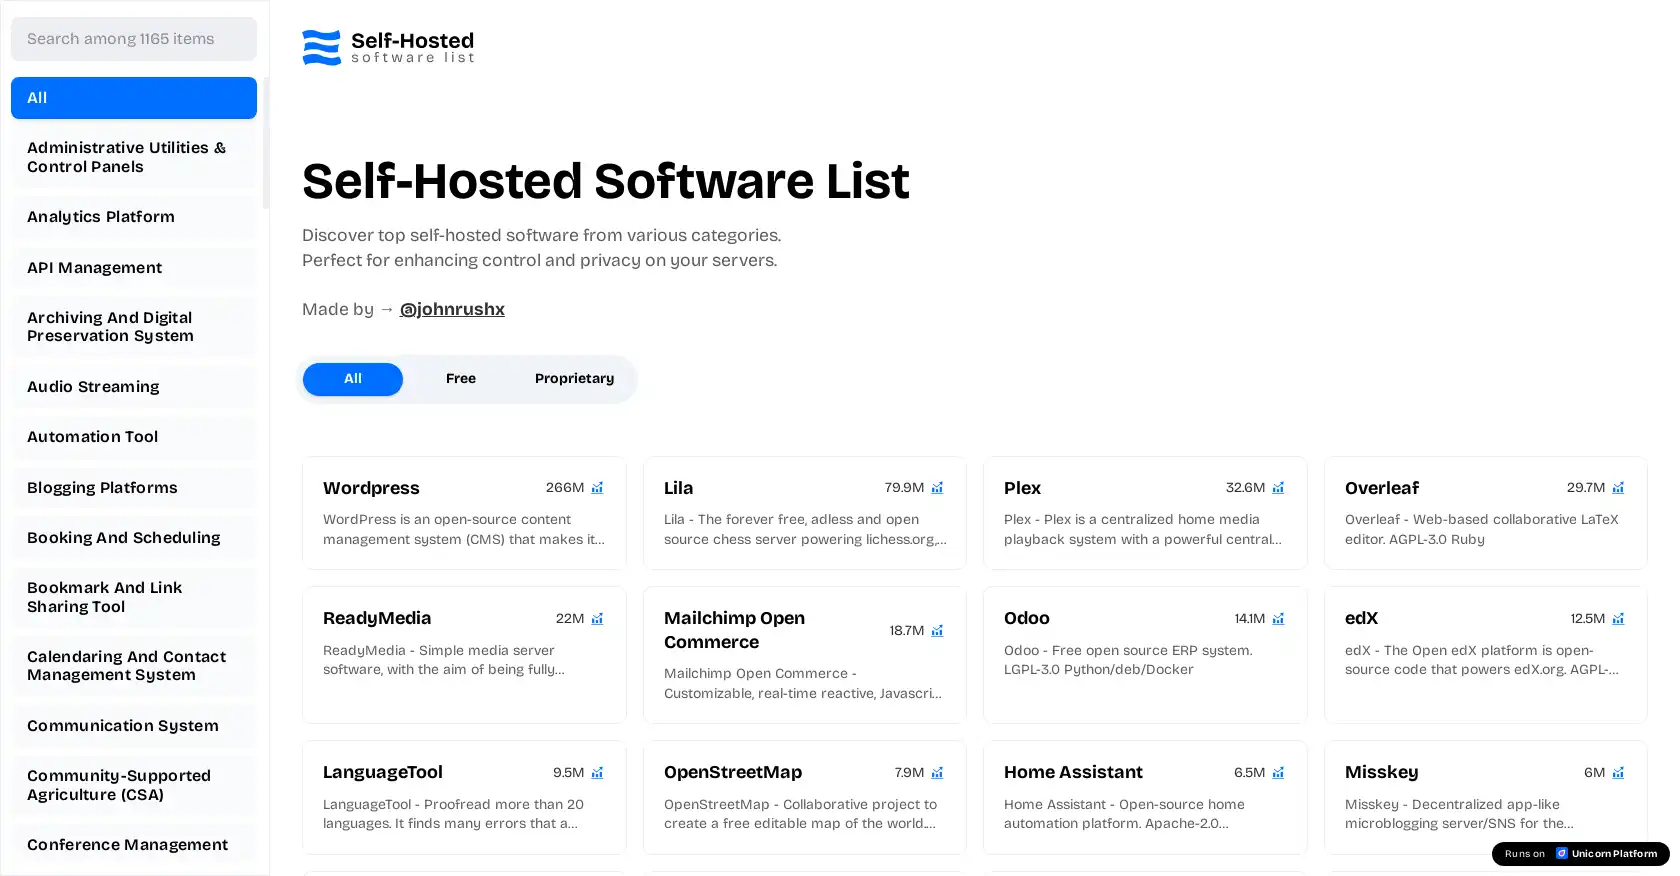 Self-Hosted Software List